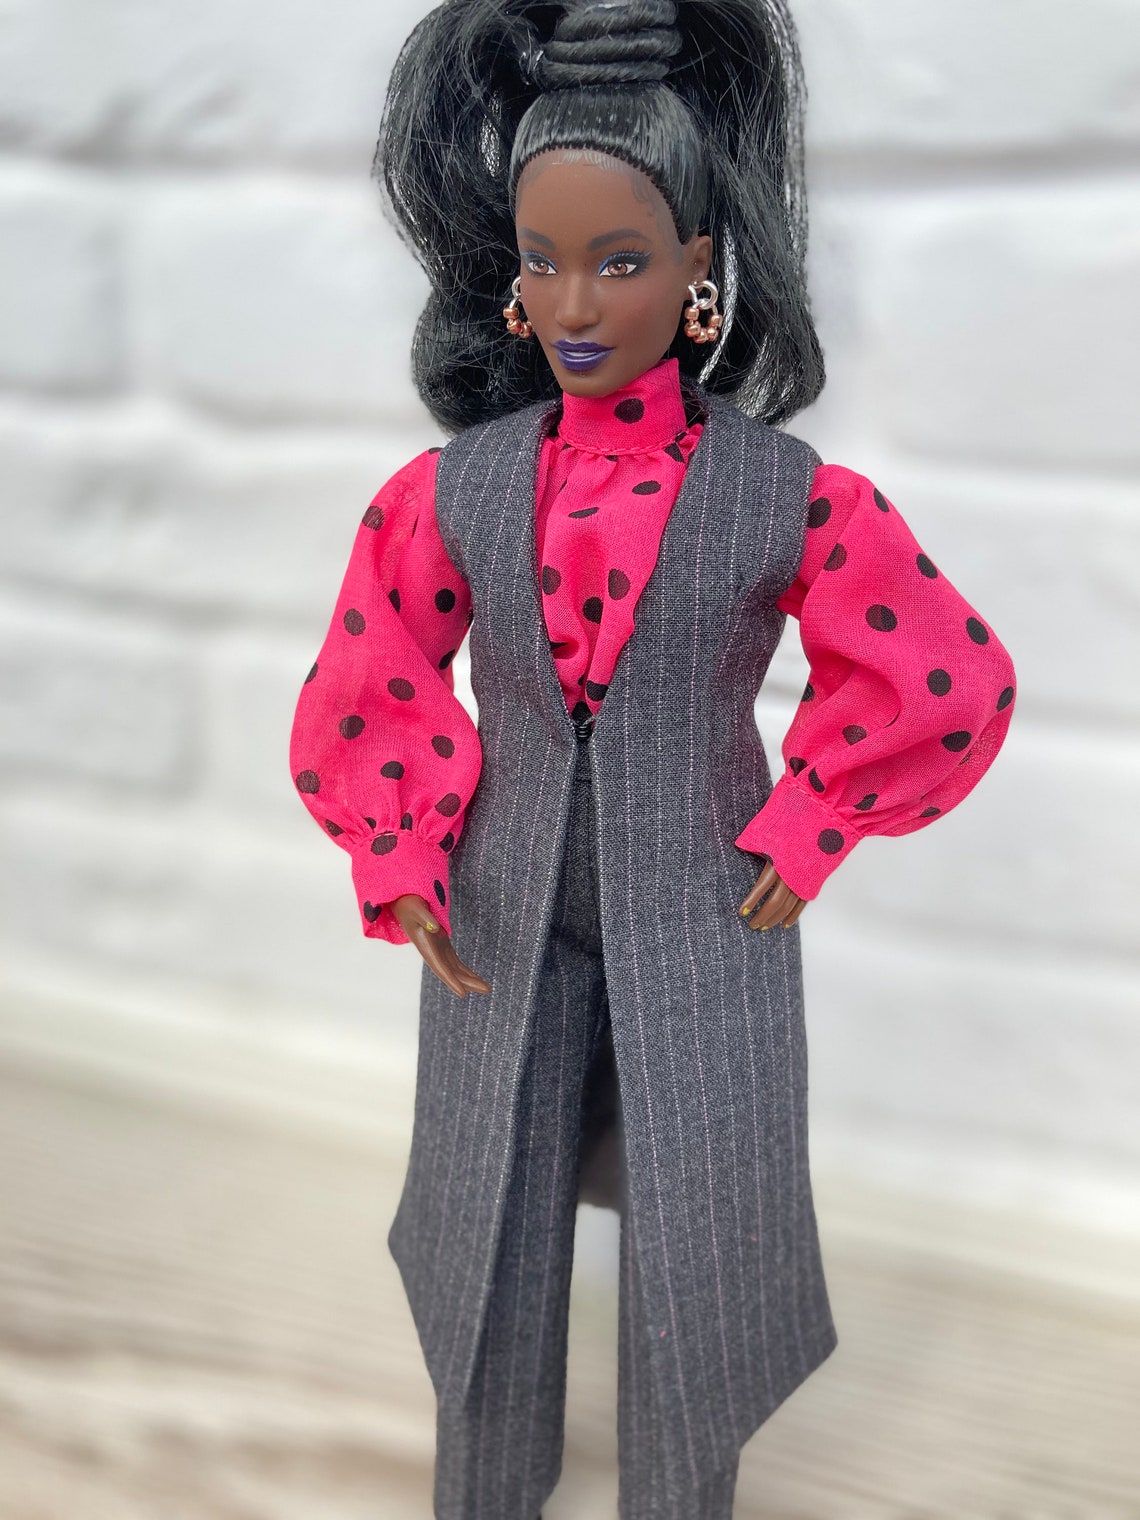 Suit for Curvy Barbie Doll | Etsy